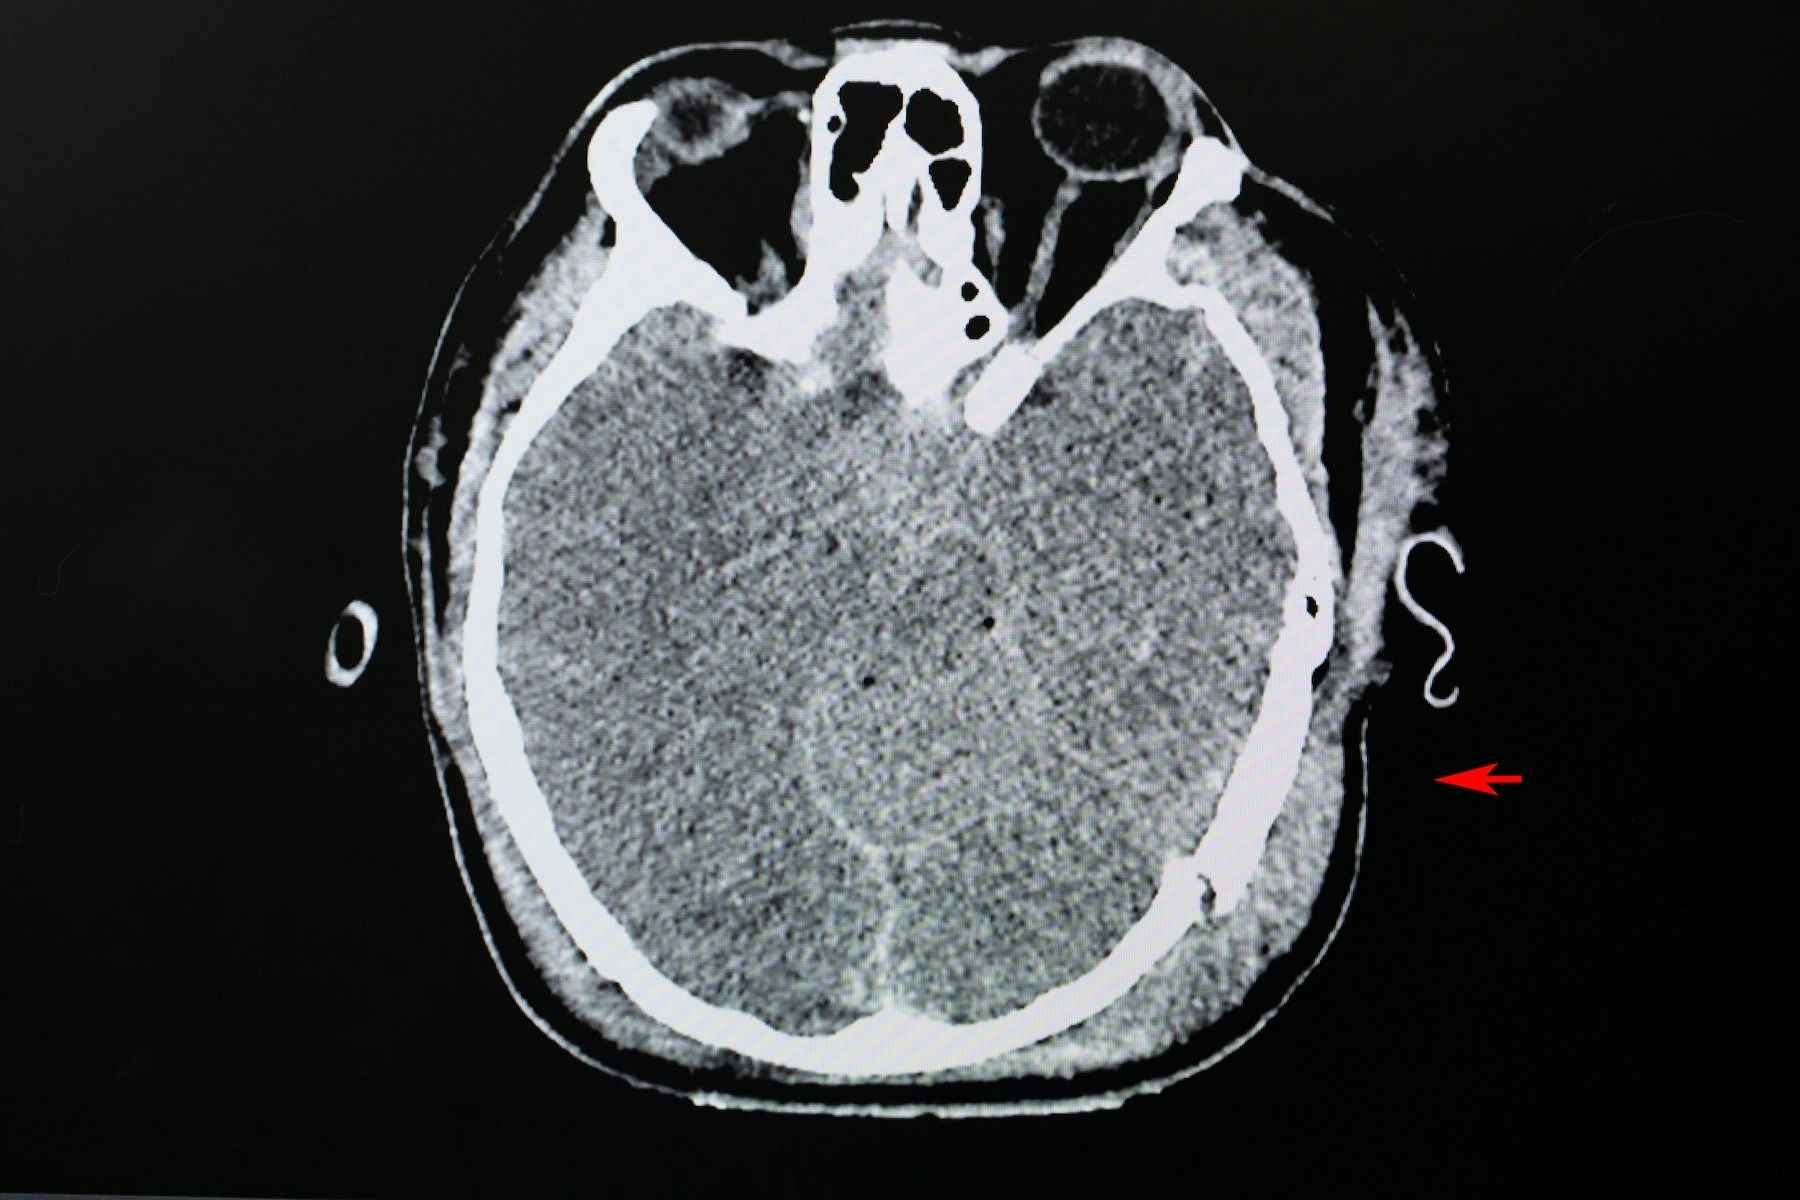 CT scan of skull fracture and cerebral hemorrhage